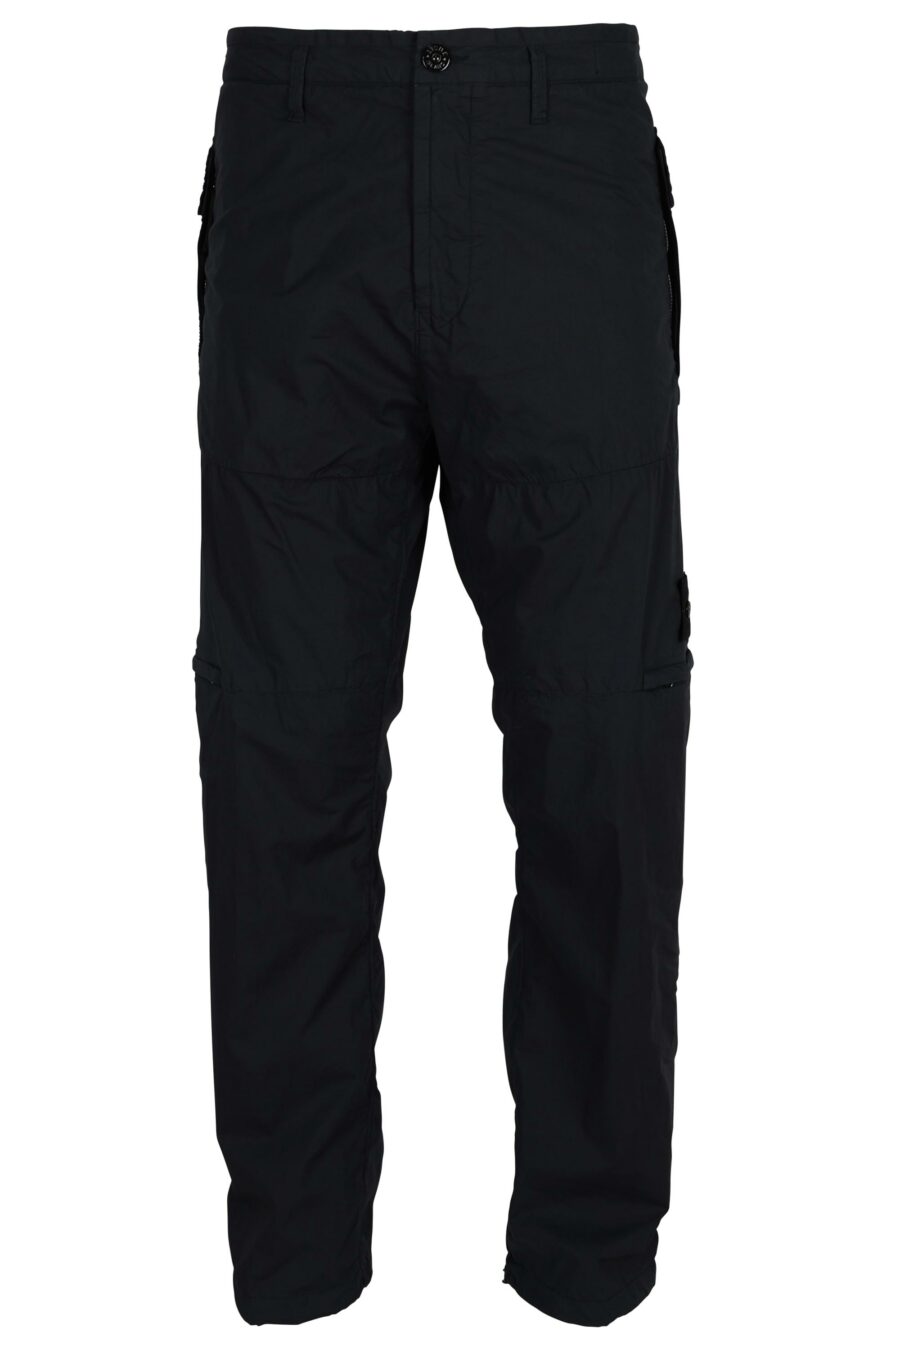 Dark blue "regular" trousers with logo compass patch - 8052572954948